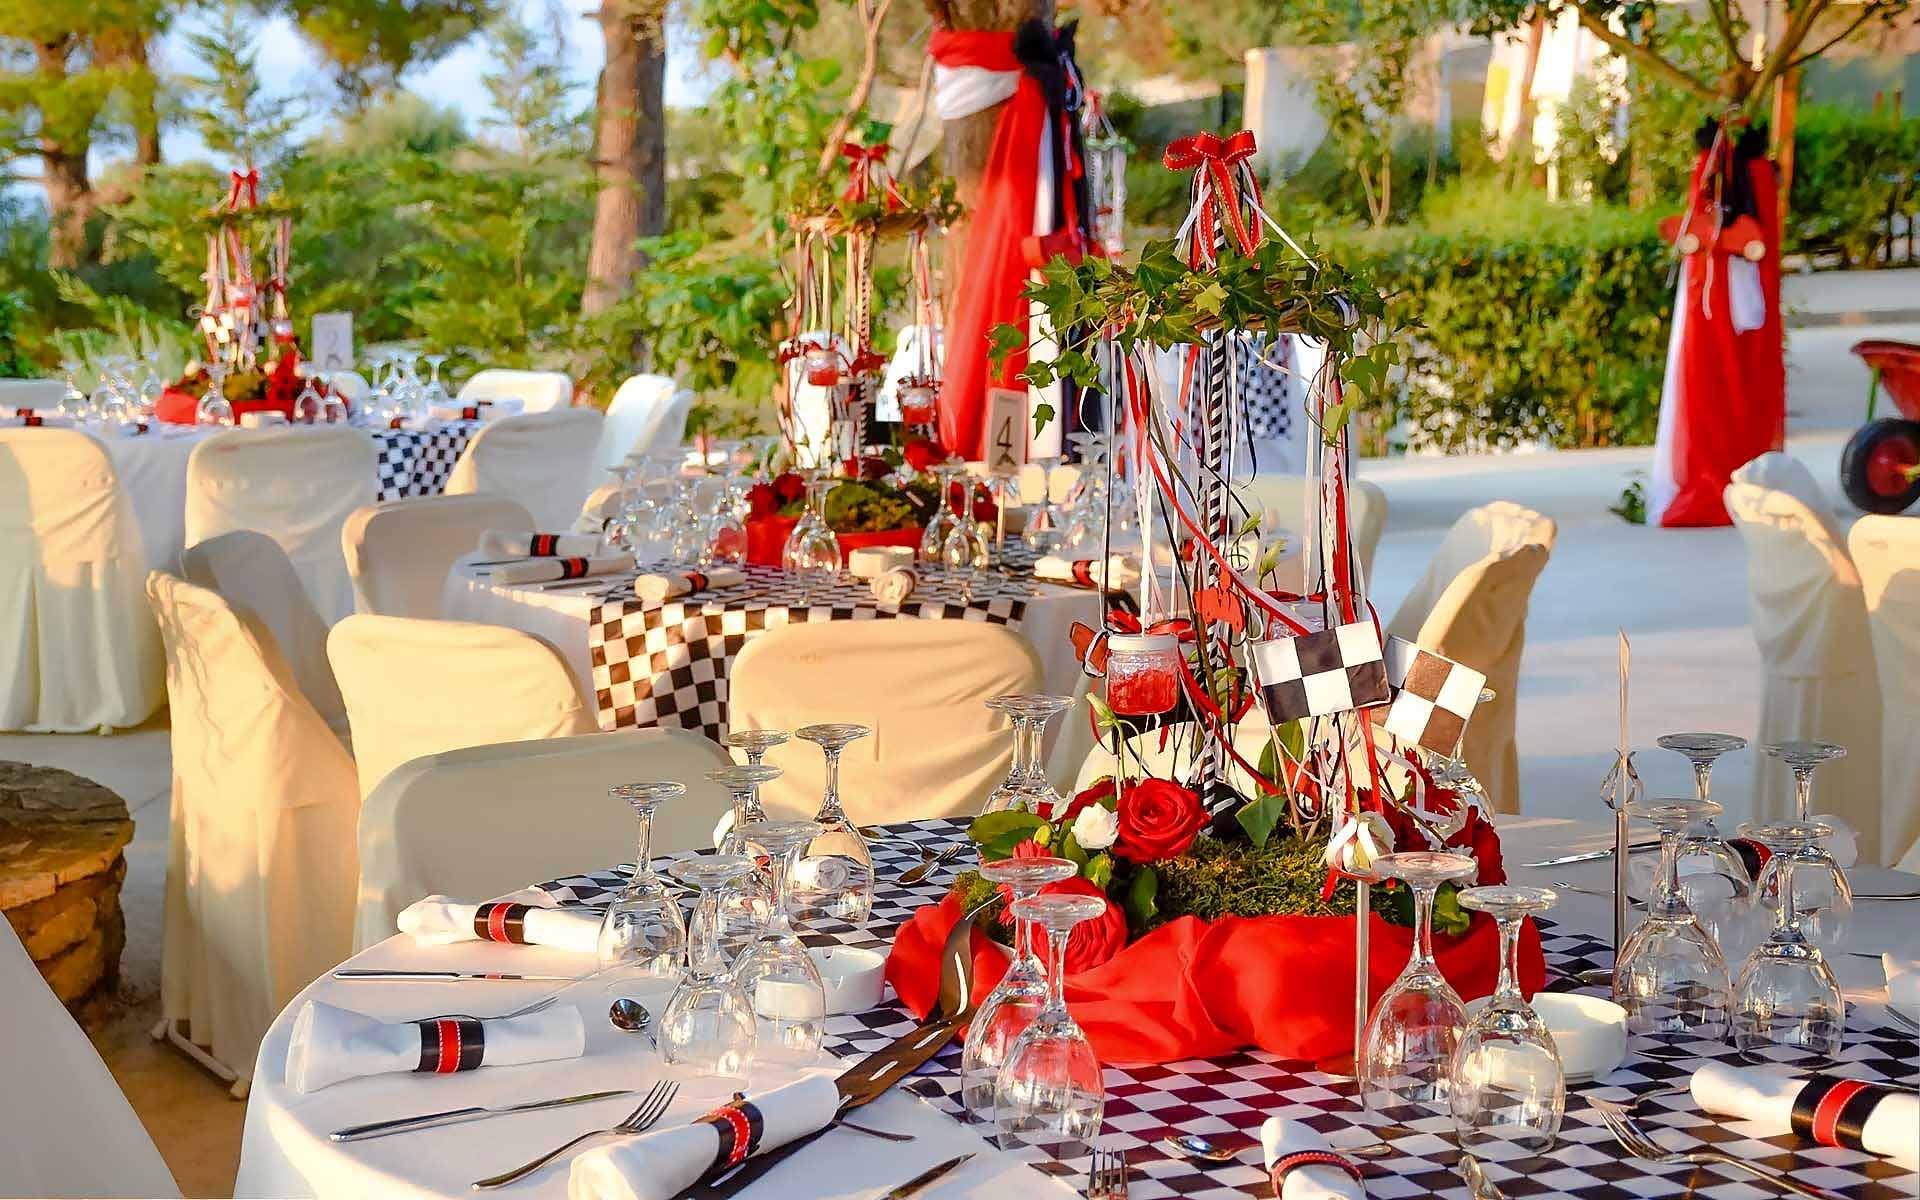 Elegant-Flower-Carousel-Centerpiece-In-Red-Flowers-And-Flags